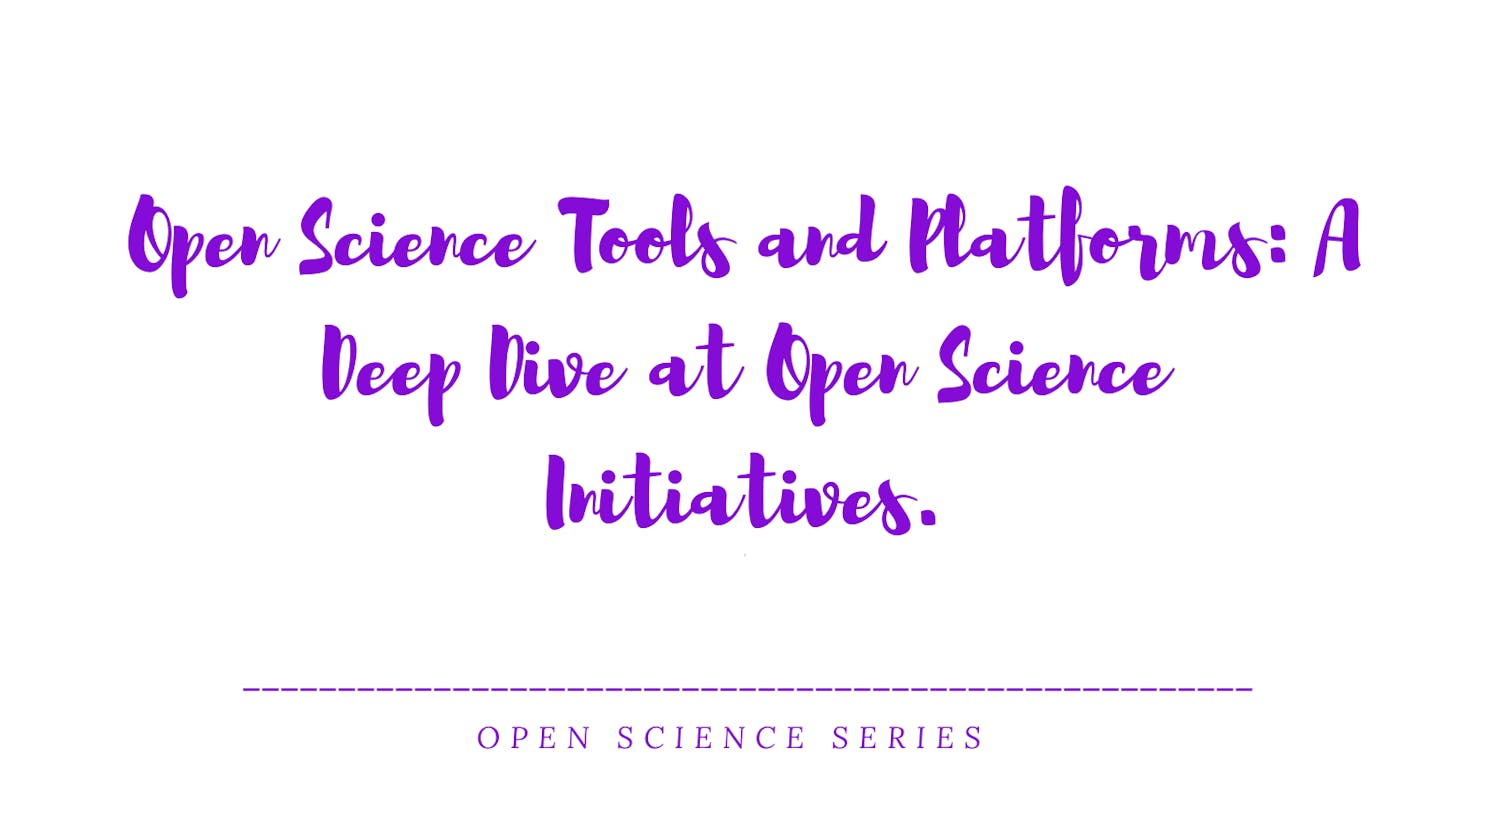 Open Science Tools and Platforms: A Deep Dive at Open Science Initiatives.